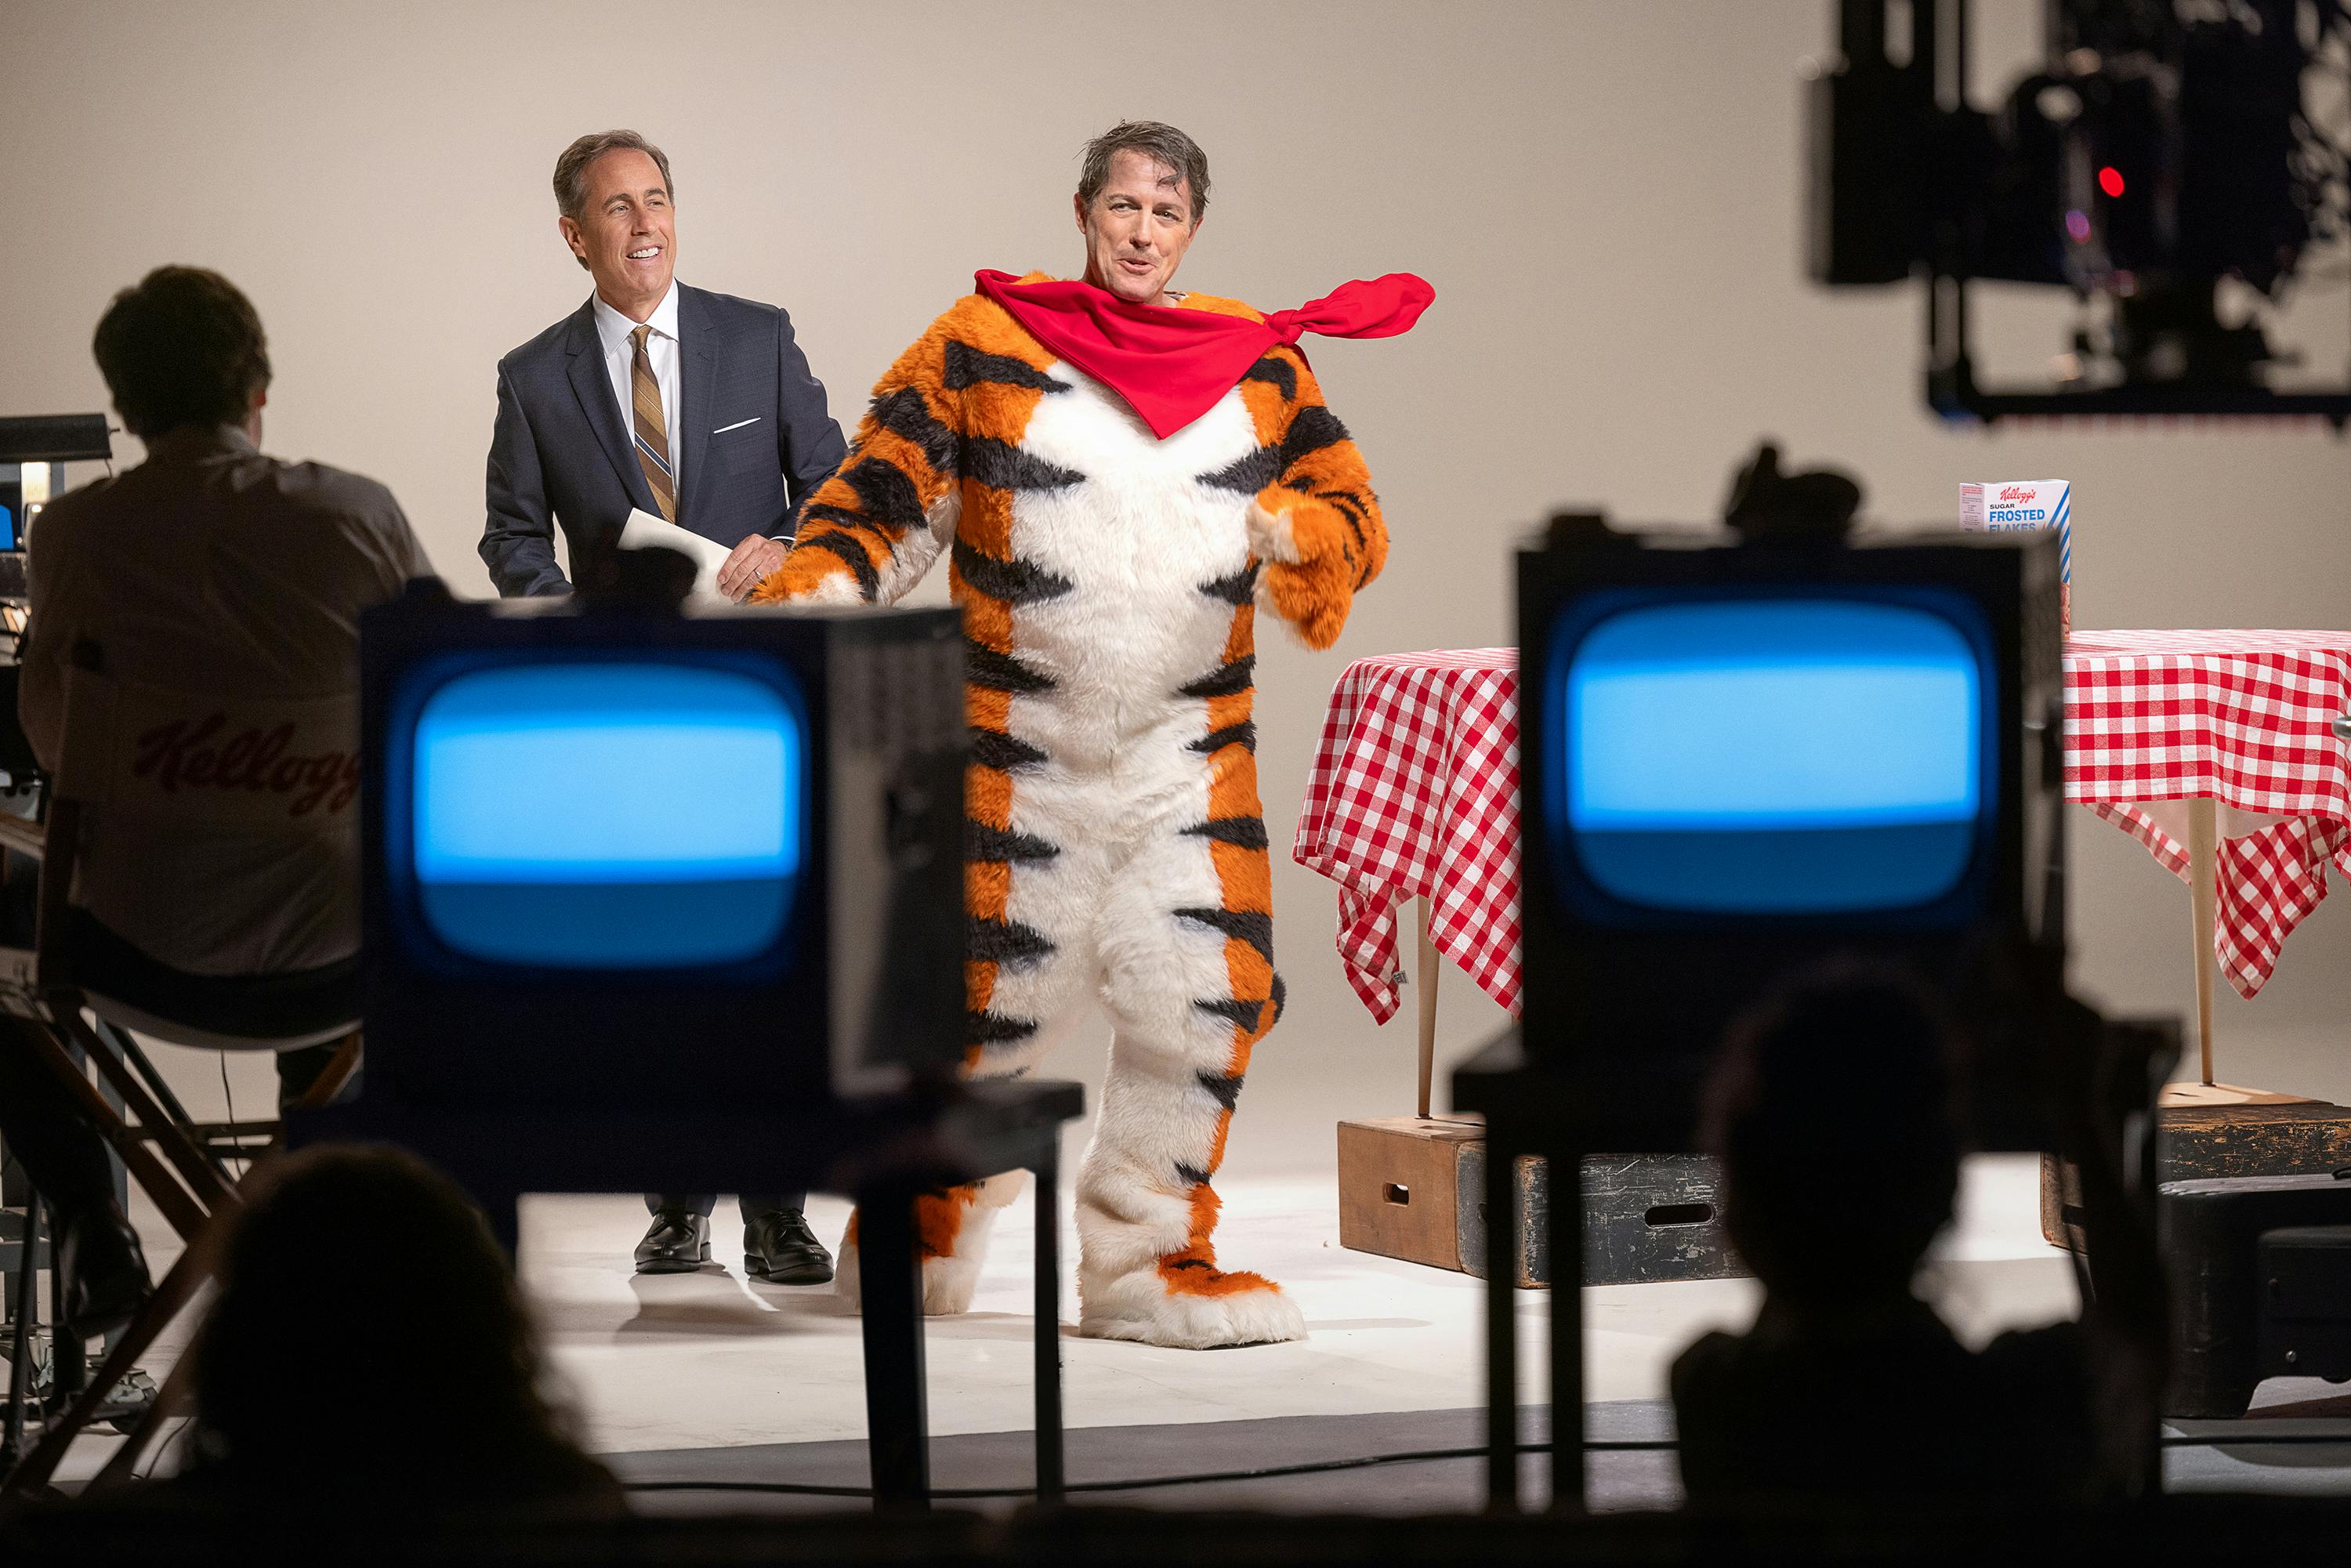 Jerry Seinfeld and Hugh Grant on set. Grant wears the Tony the Tiger costume, sans head.